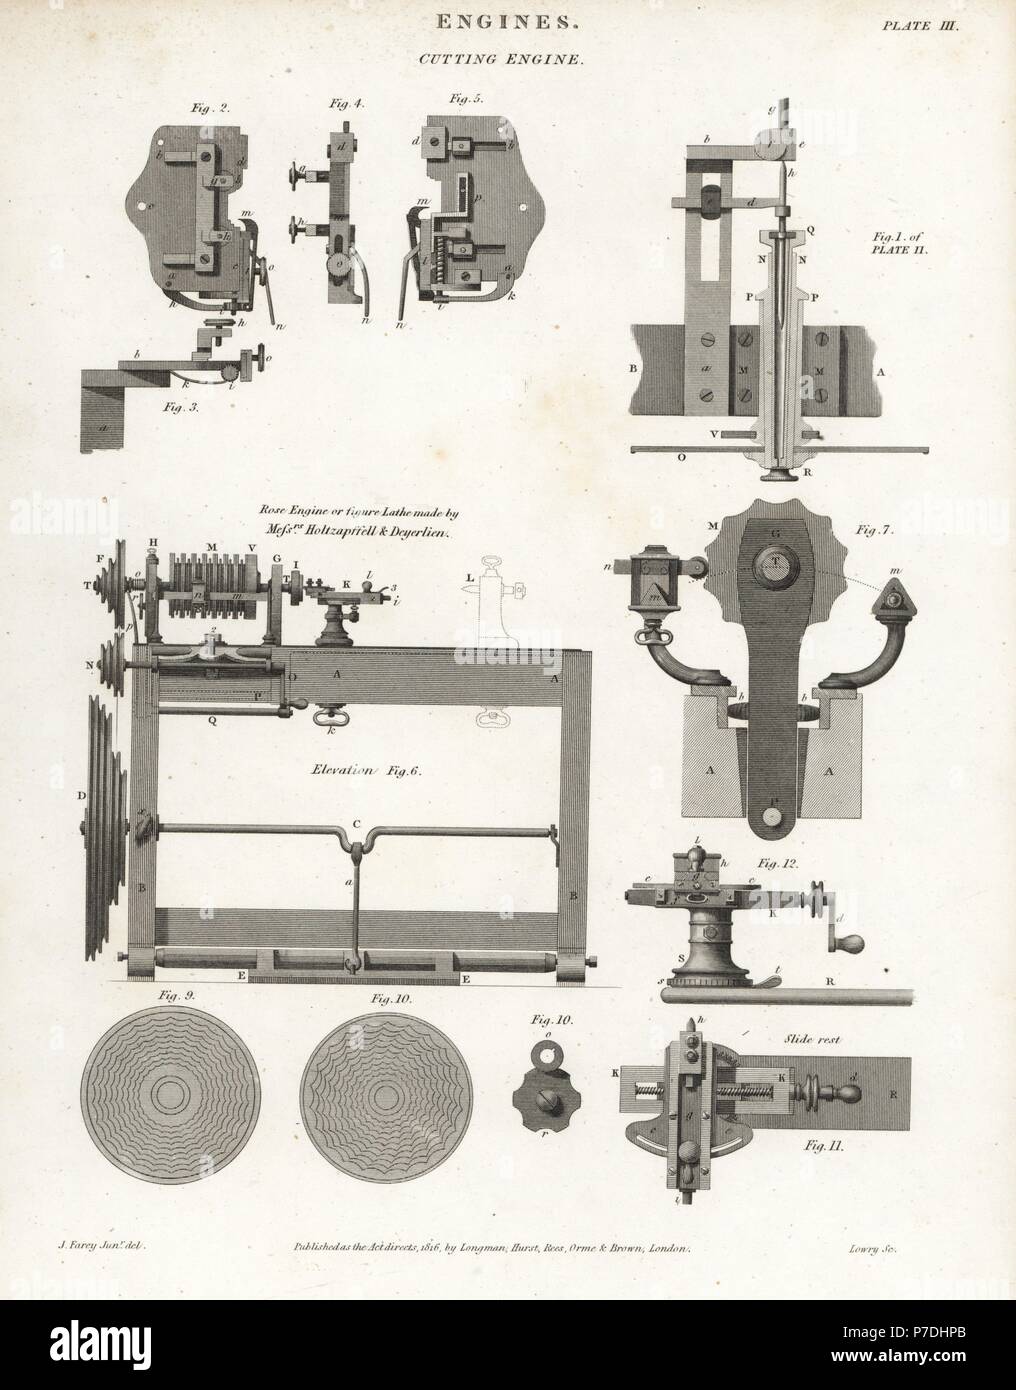 Cutting engines, 18th century, including a rose engine lathe or figure lathe made by Holtzapffell & Deyerlien. Copperplate engraving by Wilson Lowry after a drawing by John Farey Jr. from Abraham Rees' Cyclopedia or Universal Dictionary of Arts, Sciences and Literature, Longman, Hurst, Rees, Orme and Brown, London, 1816. Stock Photo